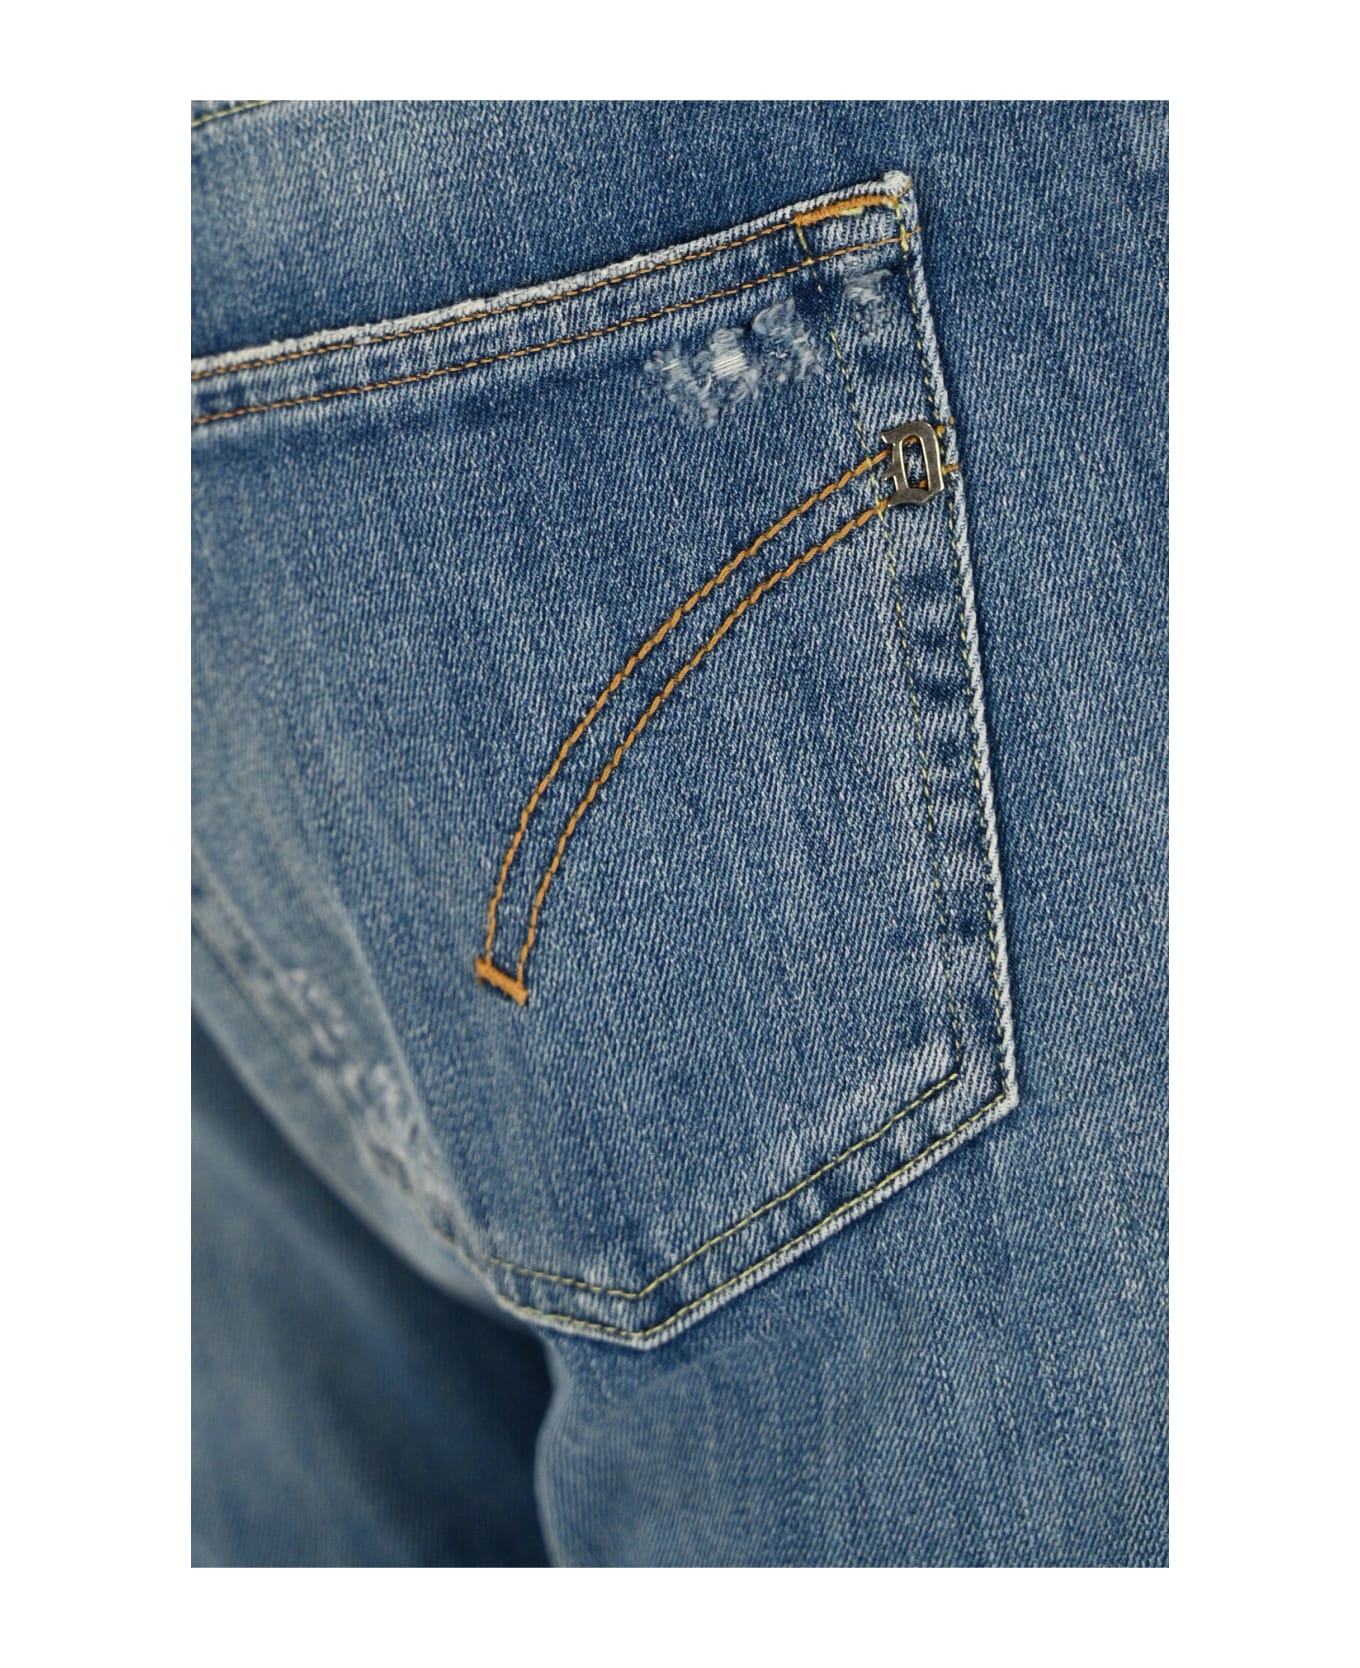 Dondup Dian Jeans In Carrot Fit Cotton - Denim デニム